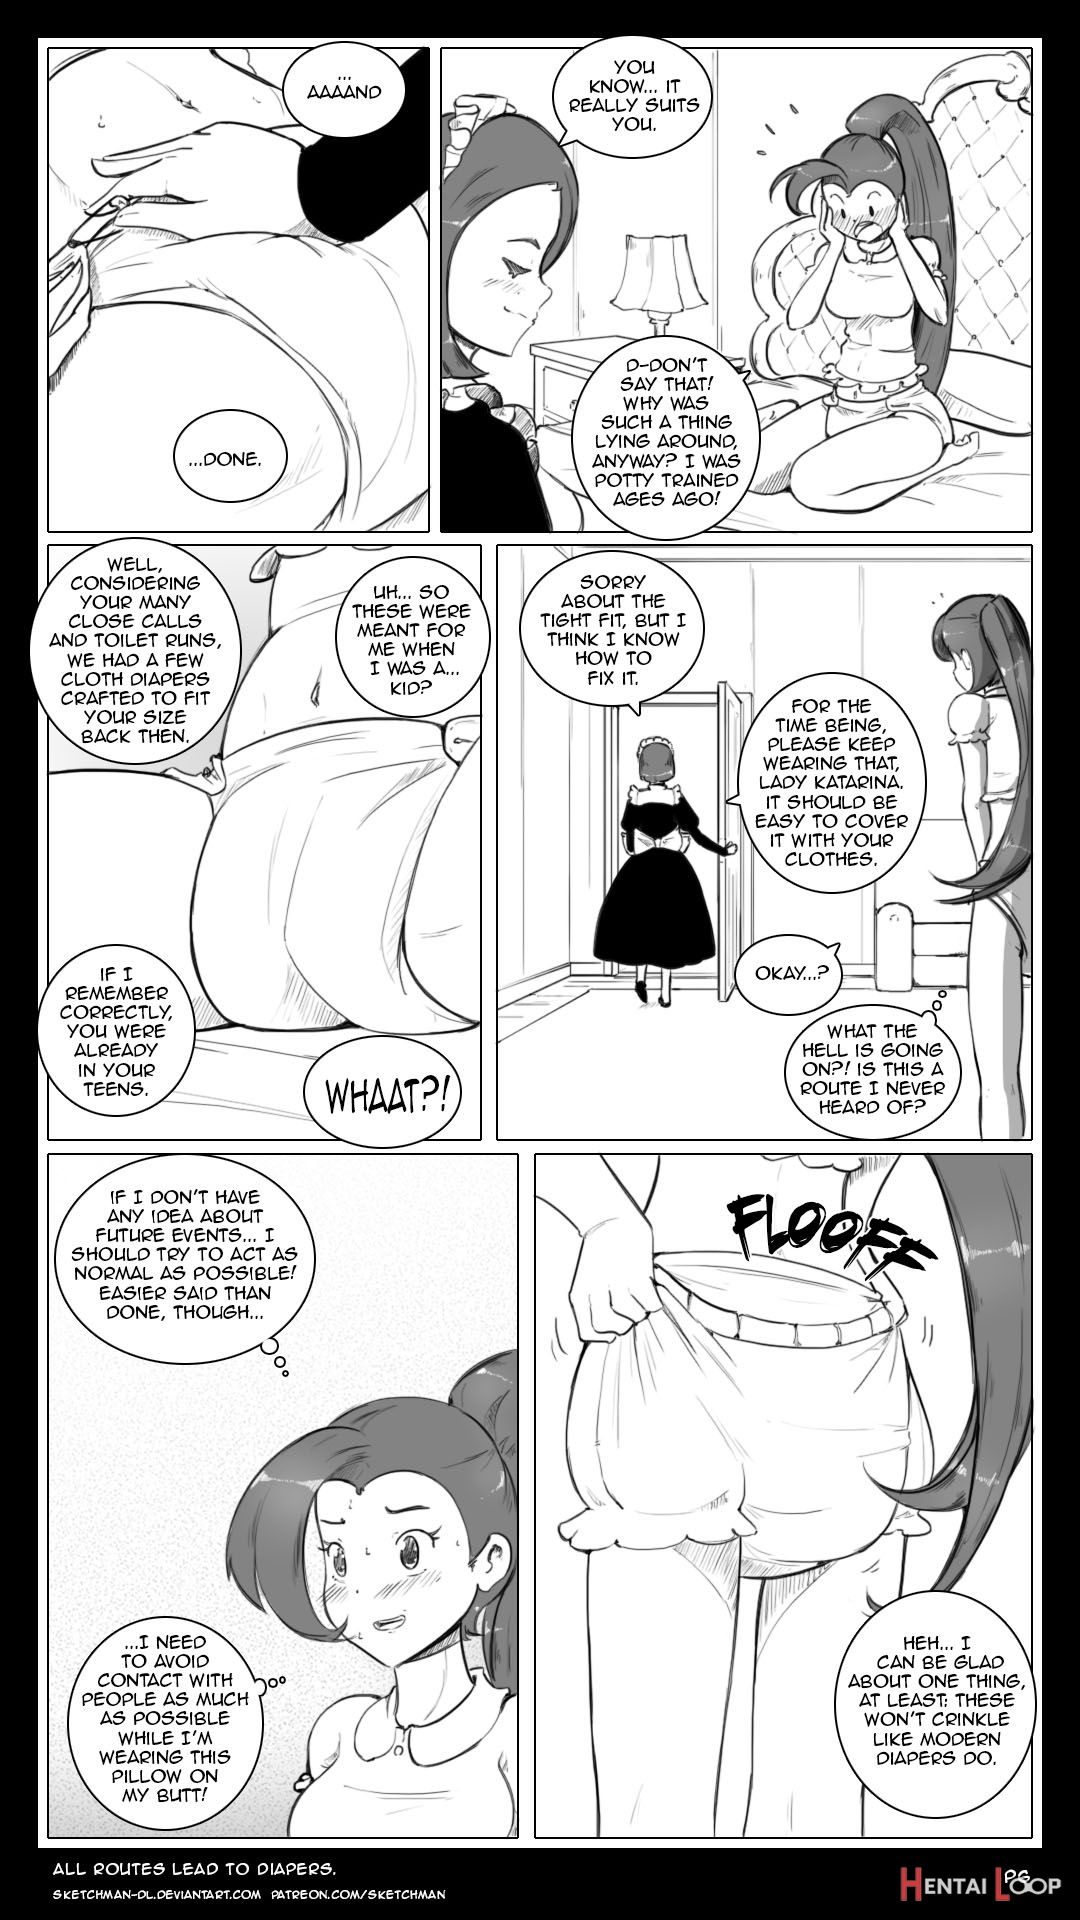 Allroutesleadtodiapers page 10